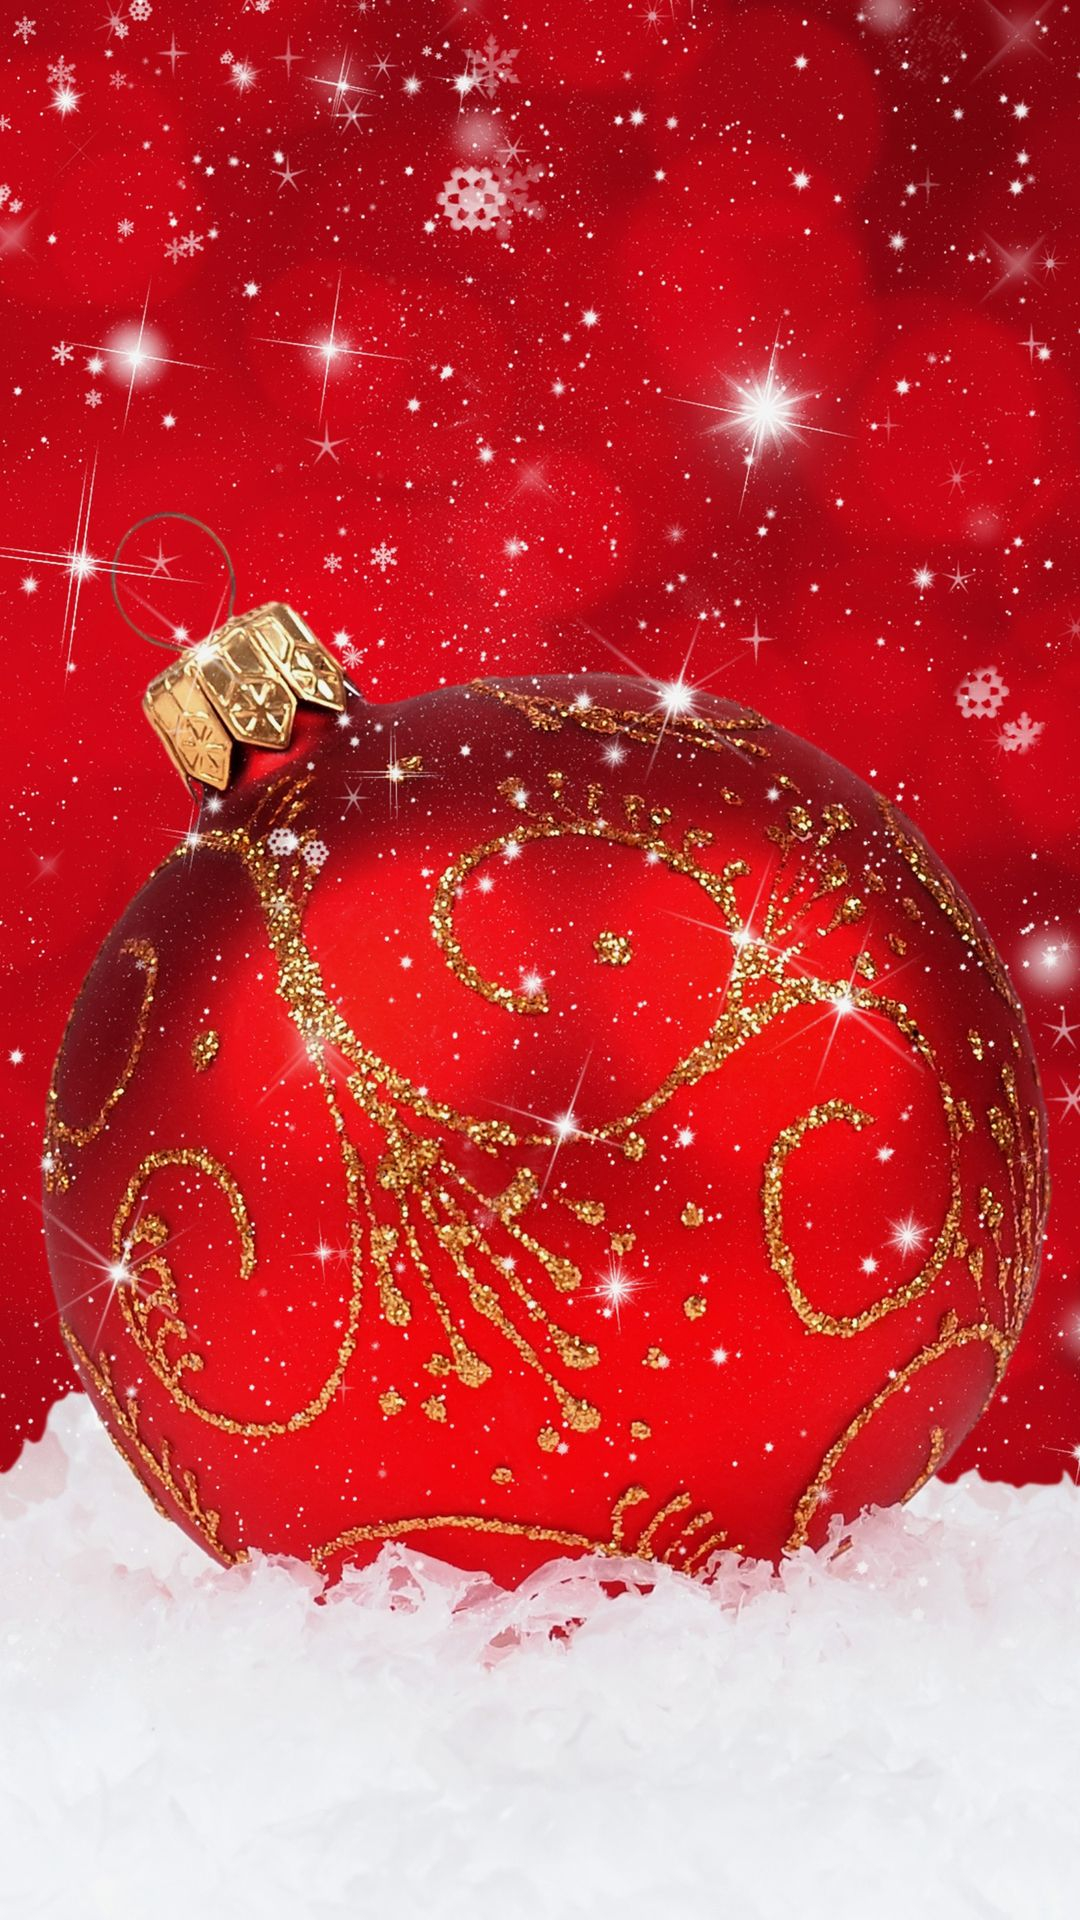 1080x1920 Red Christmas Snowy wallpaper | Gold christmas wallpaper, Christmas phone wallpaper, Cute christmas wallpaper